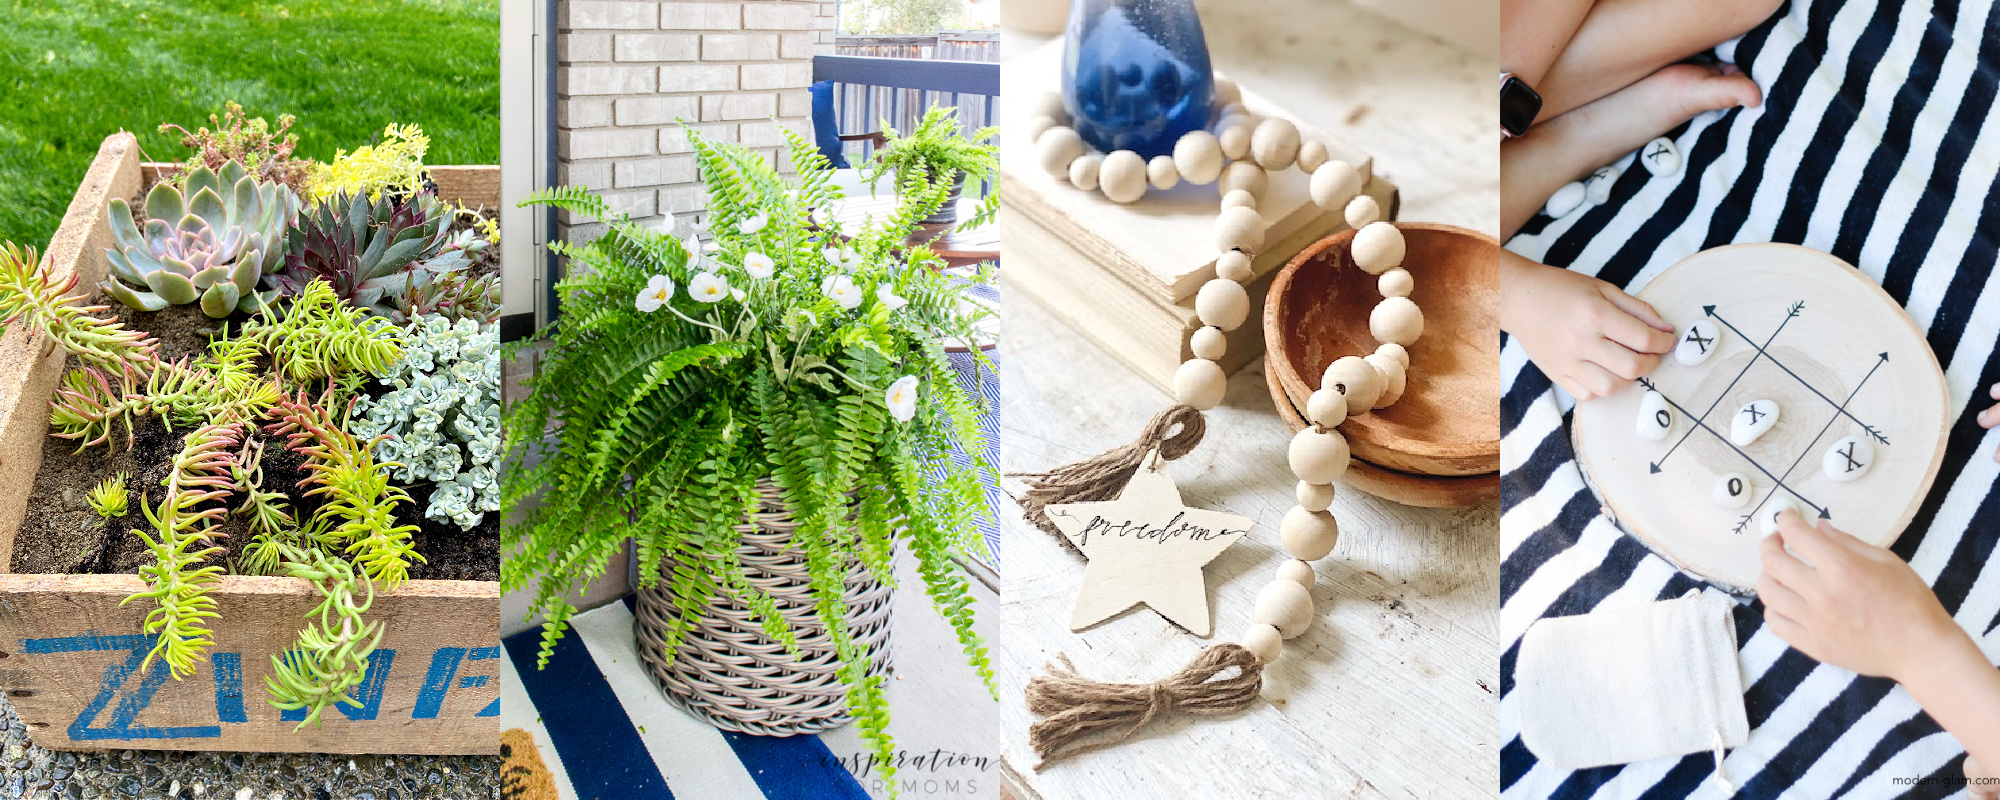 DIY Beaded Garland by popular Alabama DIY blog, She Gave It A Go: collage image of a wooden succulent planter box, fern plant in a wicker basket, wooden bead garland, and DIY Tic Tac Toe game. 